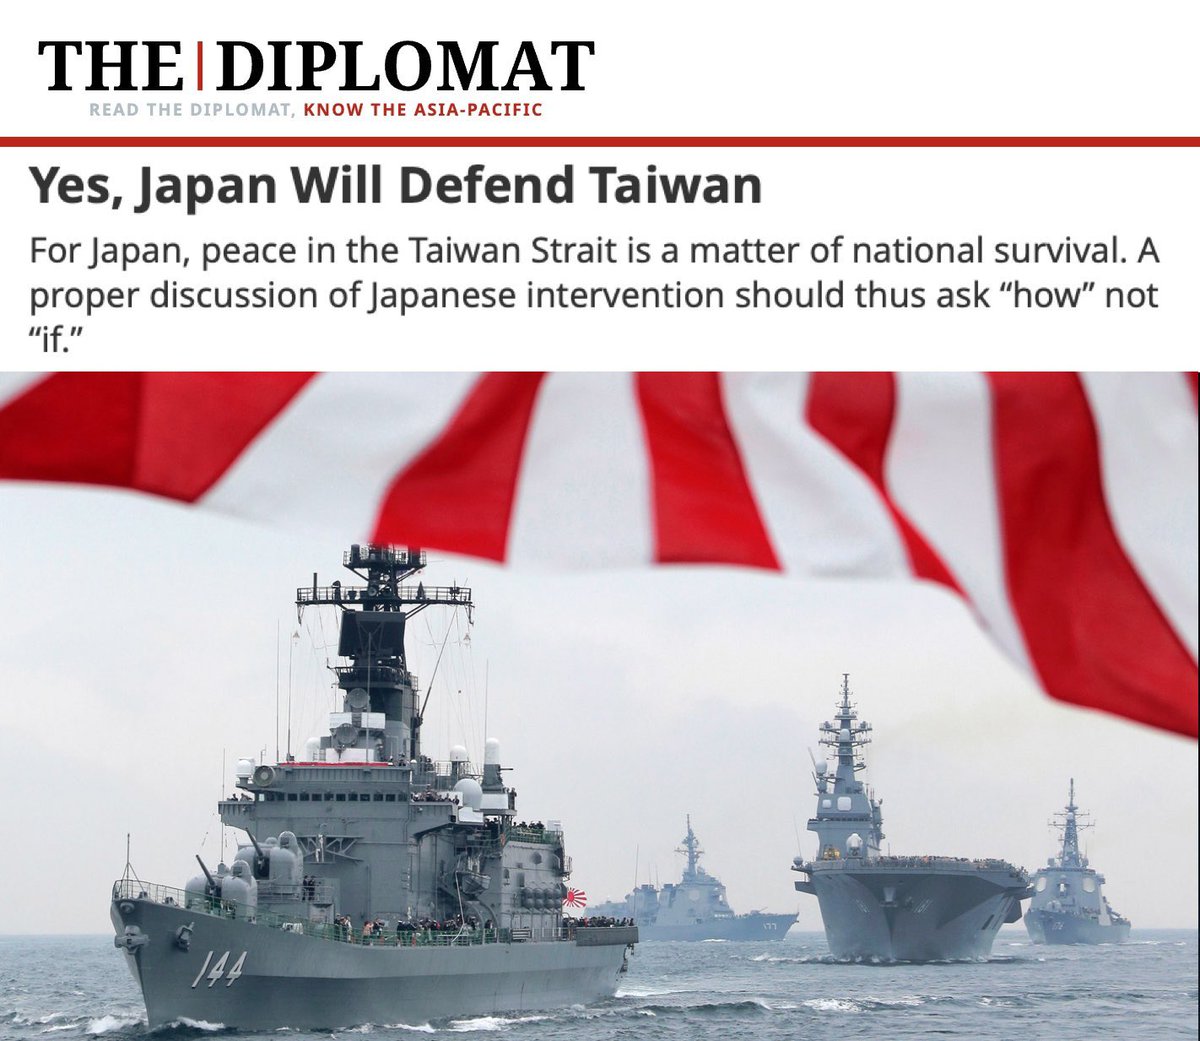 🚨Update: Tokyo stated that it will defend Taiwan, because it recognizes Taiwan as an independent nation, not a province of China. Japan states it will not publicly declare that They recognize Taiwan as independent, but in reality they do. And Japan will defend Taiwan along with